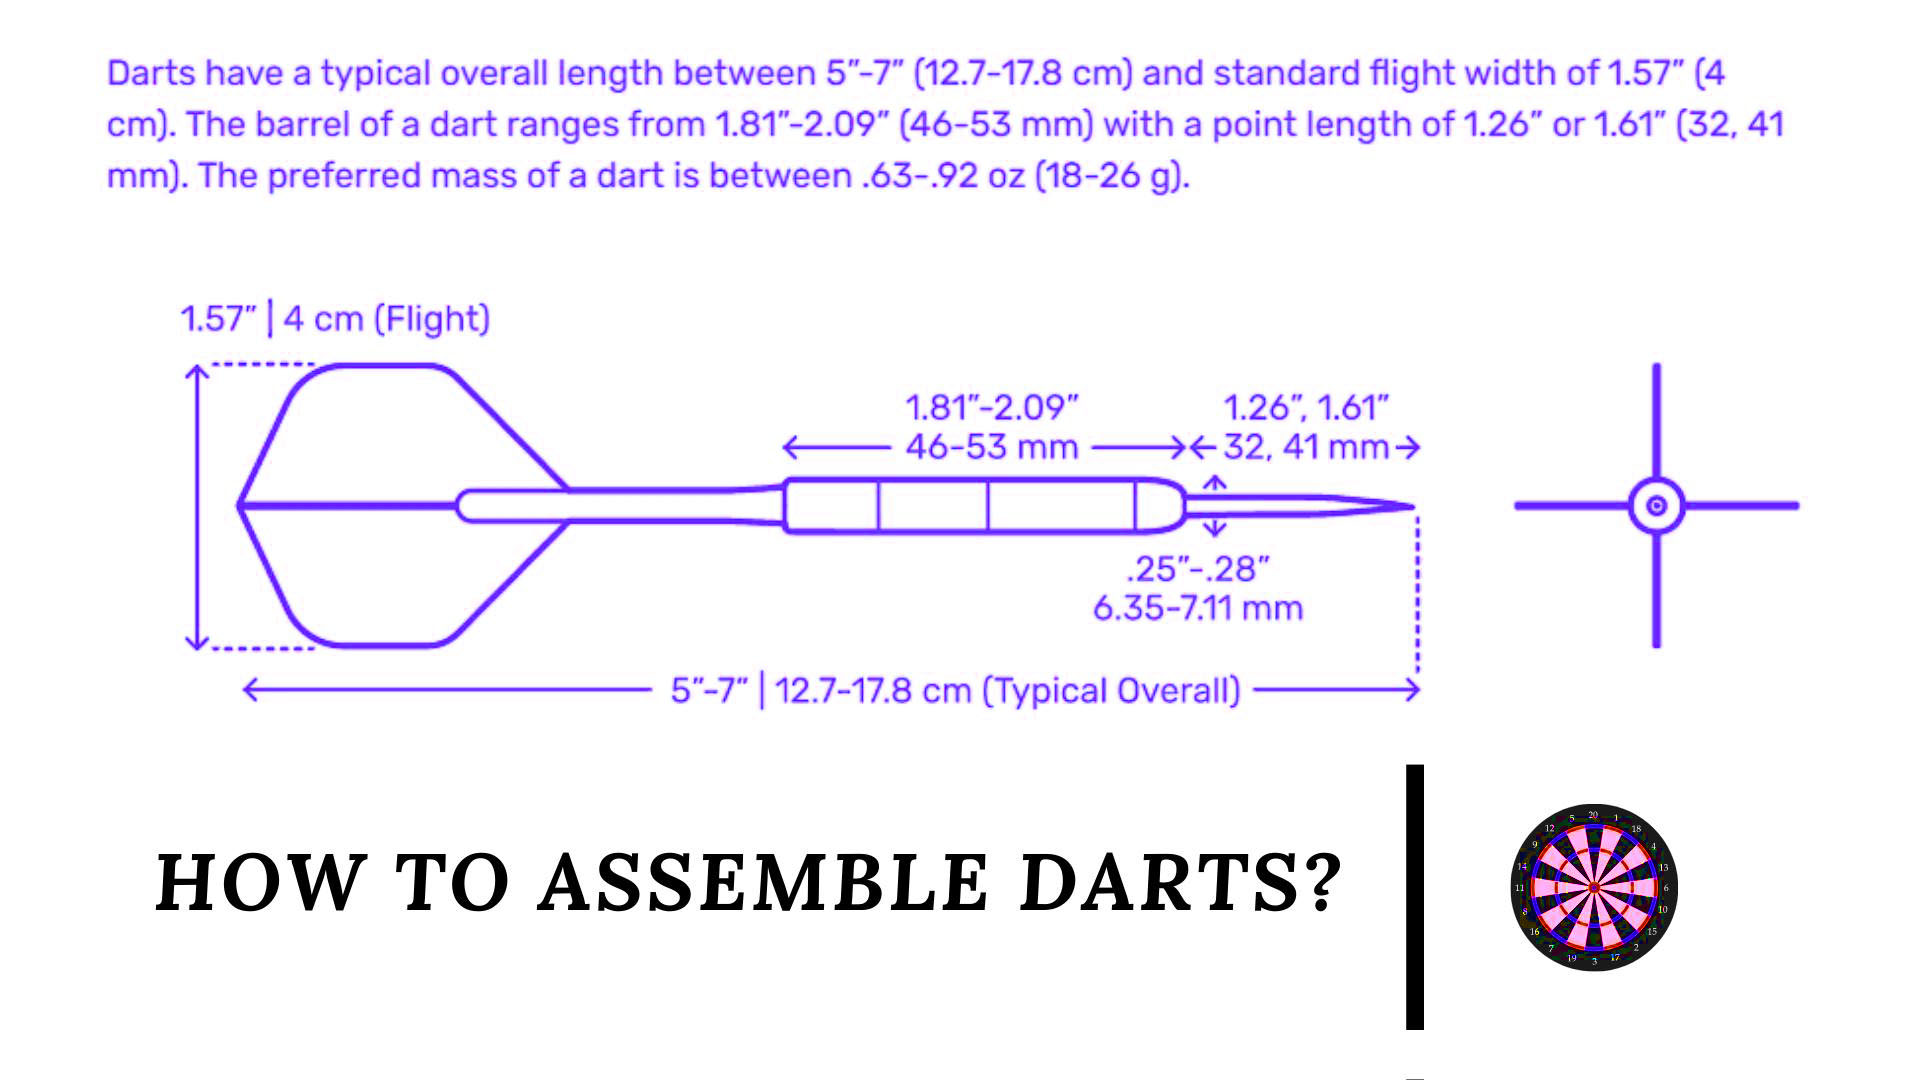 How to assemble darts?